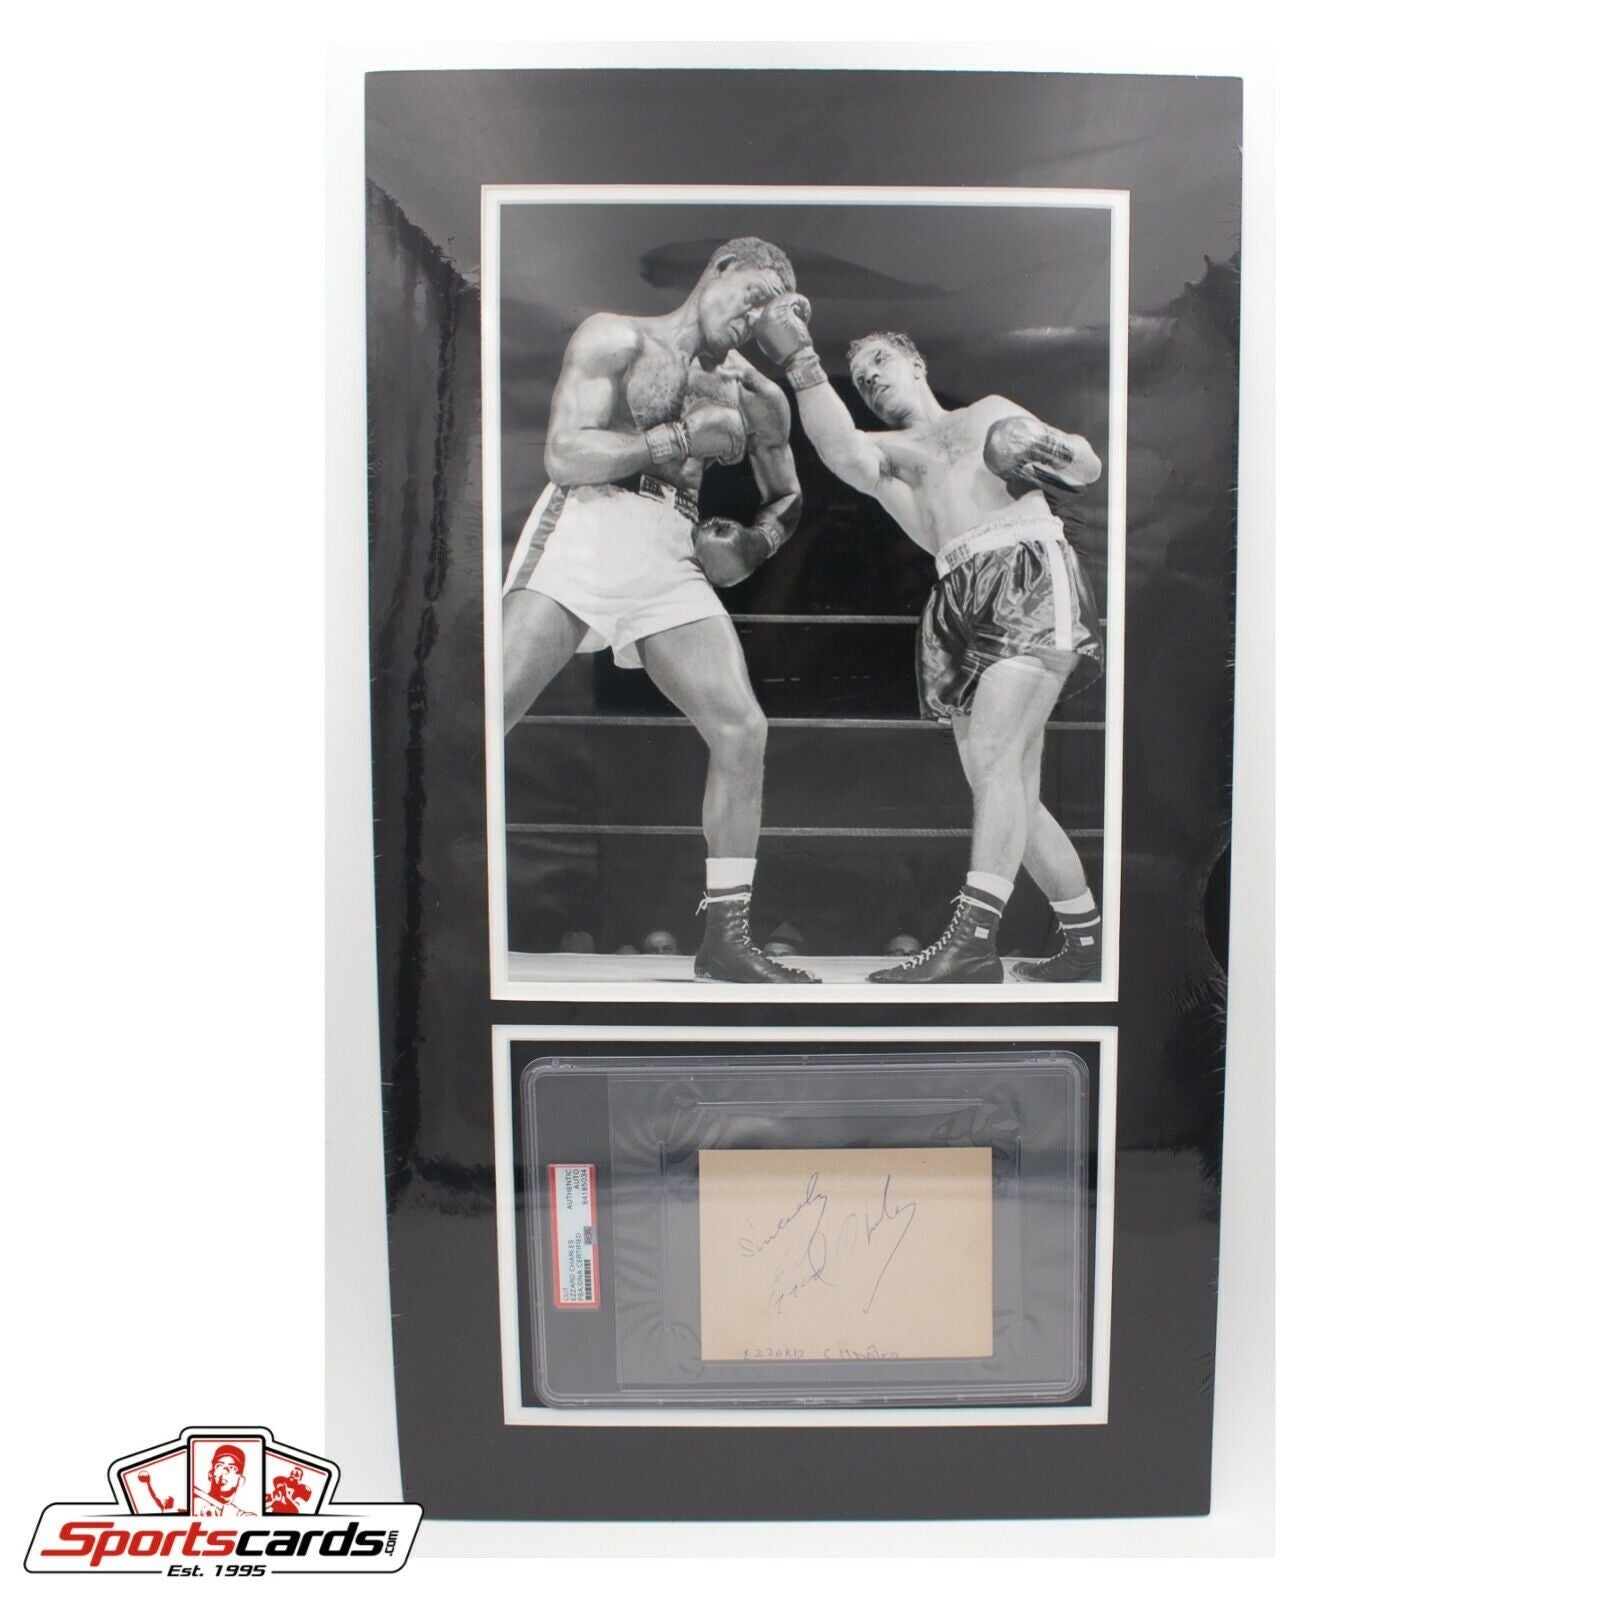 Ezzard Charles PSA/DNA Signed Cut Album Page Matted w/ 11x14 Photo 15x26 overall